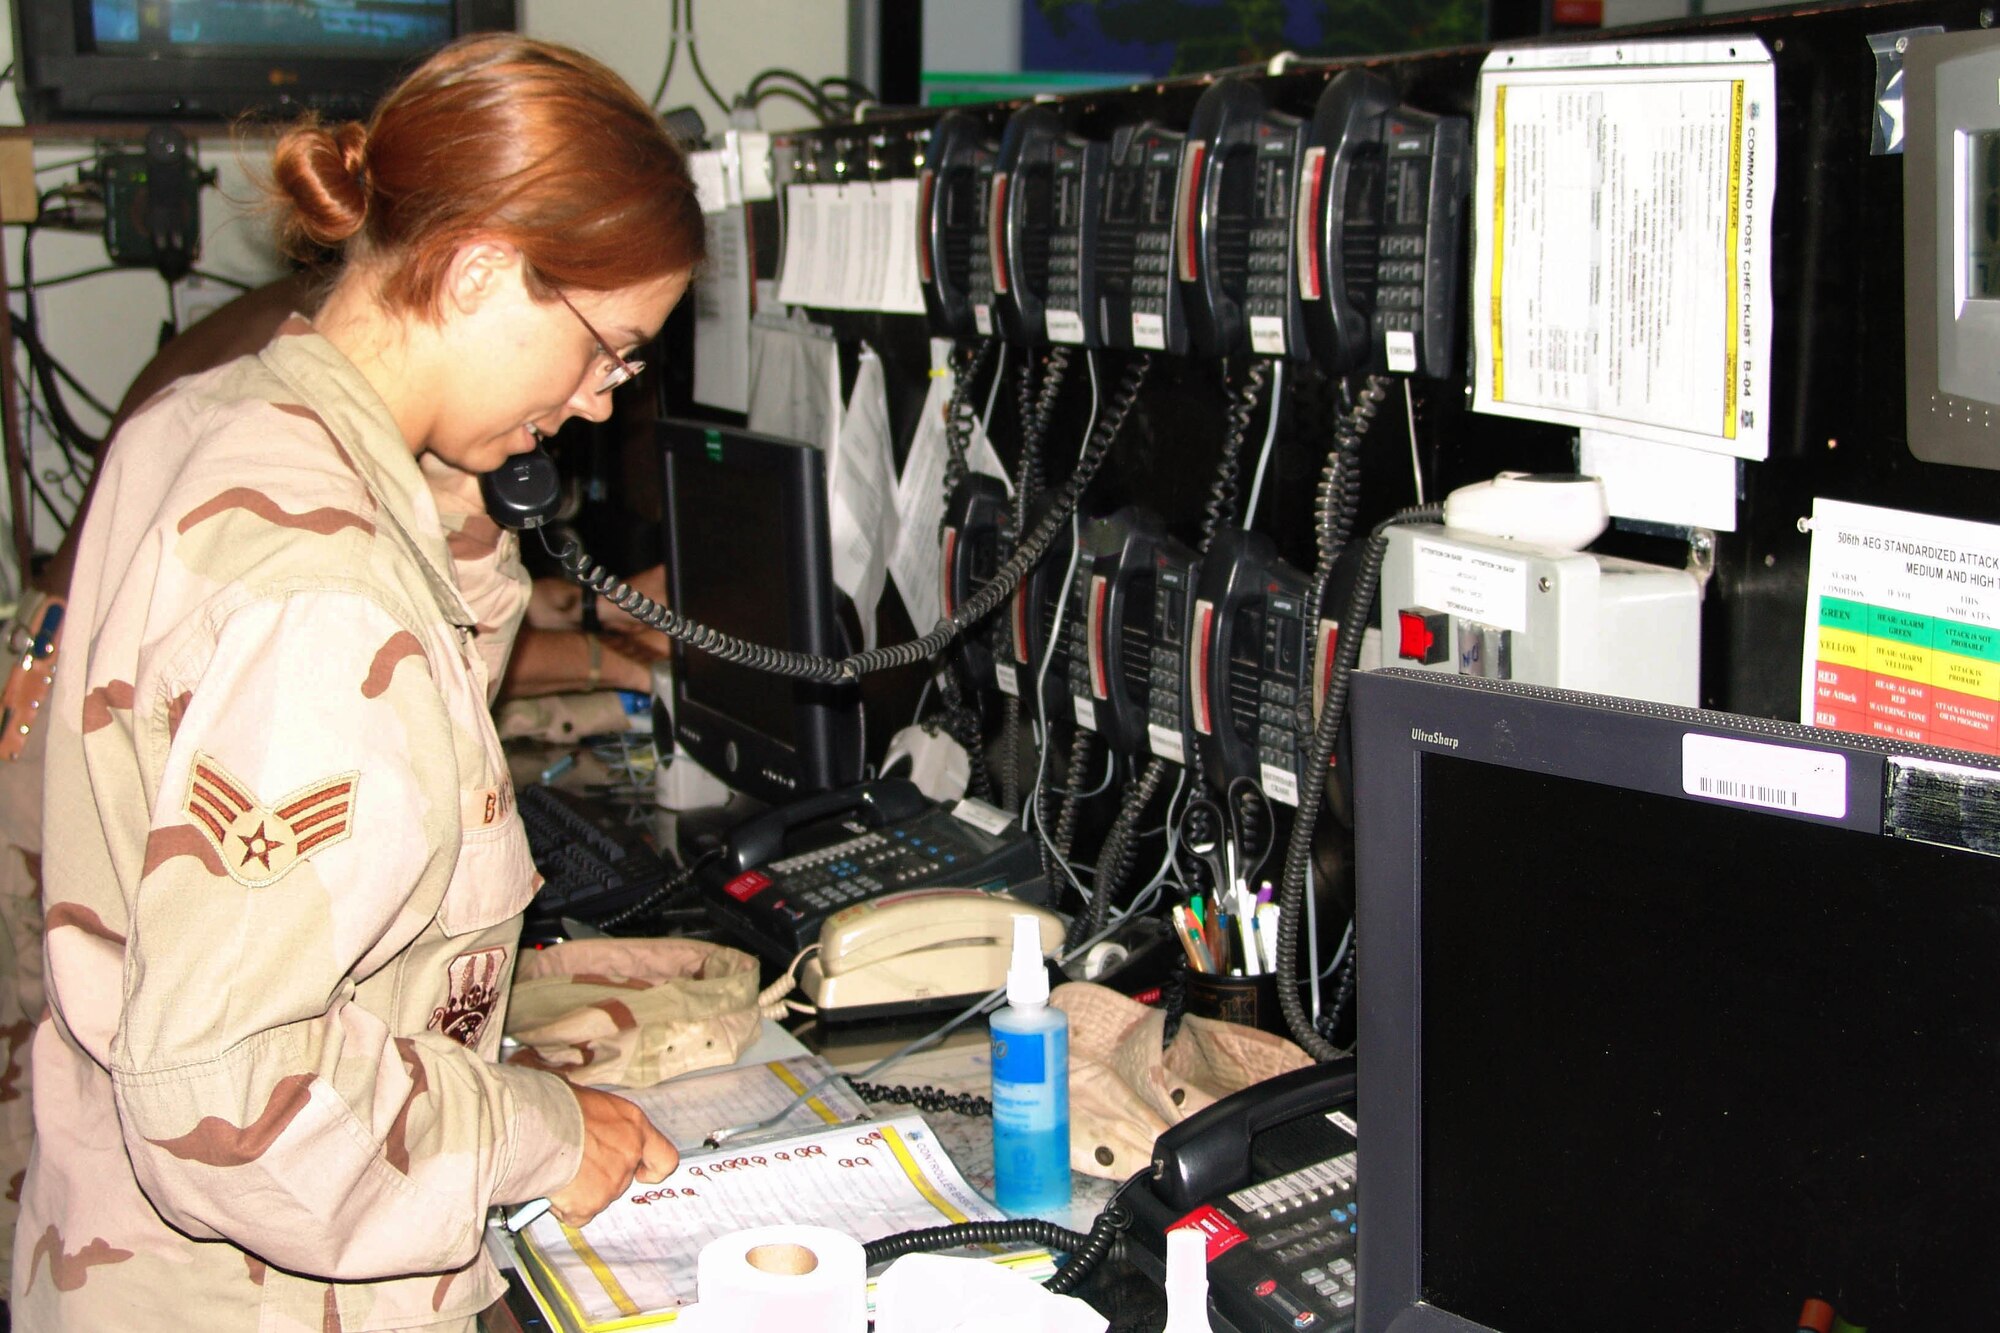 KIRKUK AIR BASE, Iraq -- Senior Airman Meghan Boyce runs a checklist in the command post here.  She is a command post controller with the 506th Air Expeditionary Group.  (U.S. Air Force photo by Tech. Sgt. J. LaVoie)